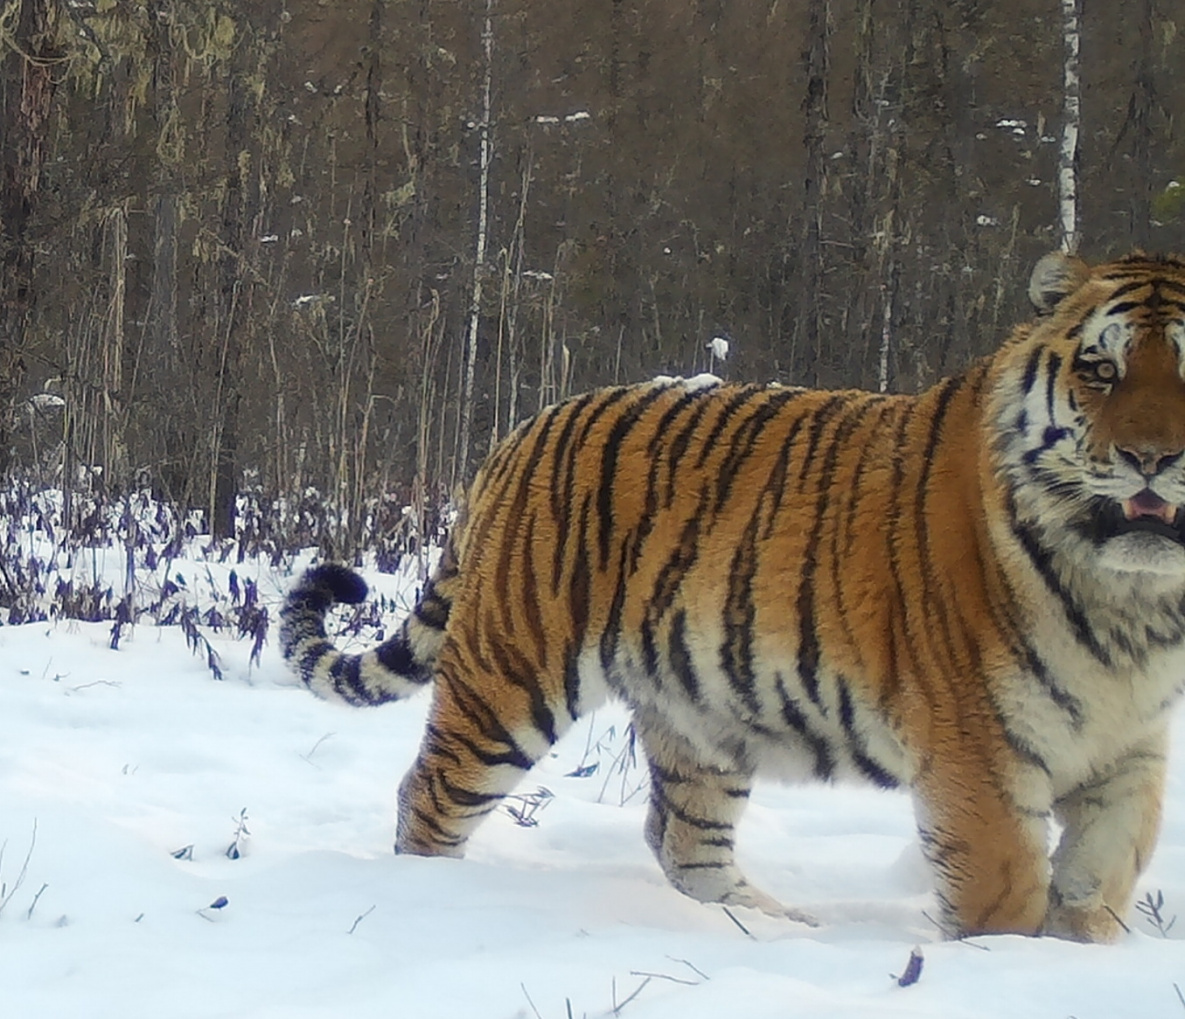 Male Amur tiger in National Park "Anyuisky"